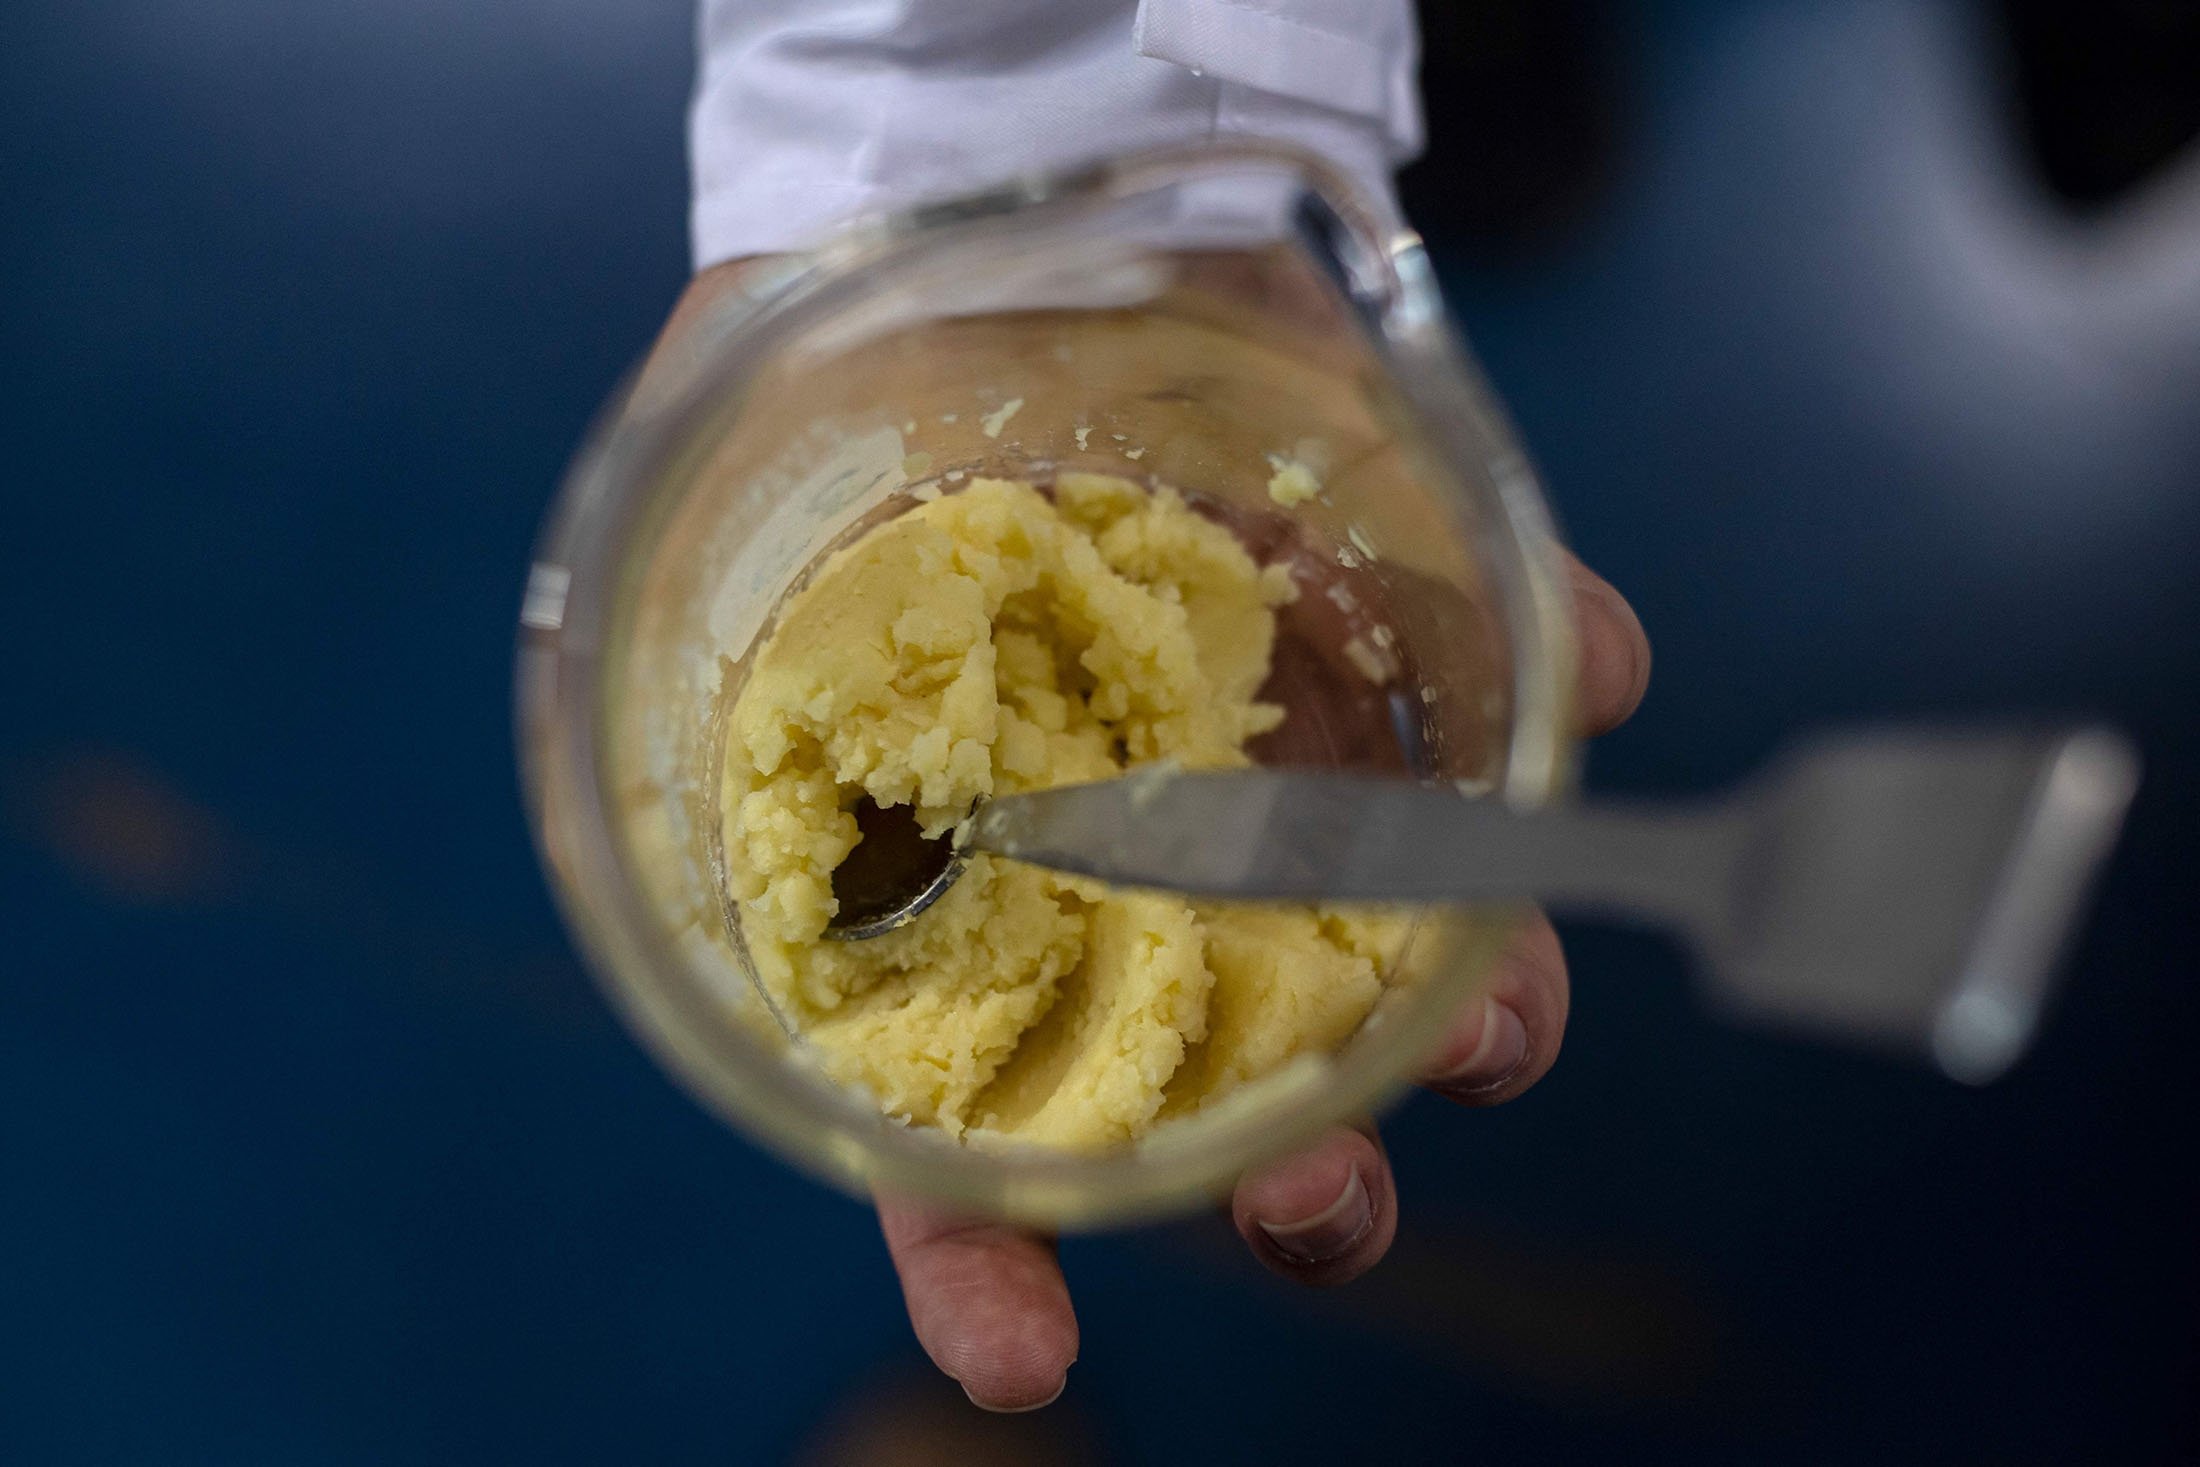 Food engineer Roberto Lemus shows a portion of food before putting it into a 3D printer in their lab at the University of Chile, Santiago, Chile, June 17, 2022. (AFP Photo)